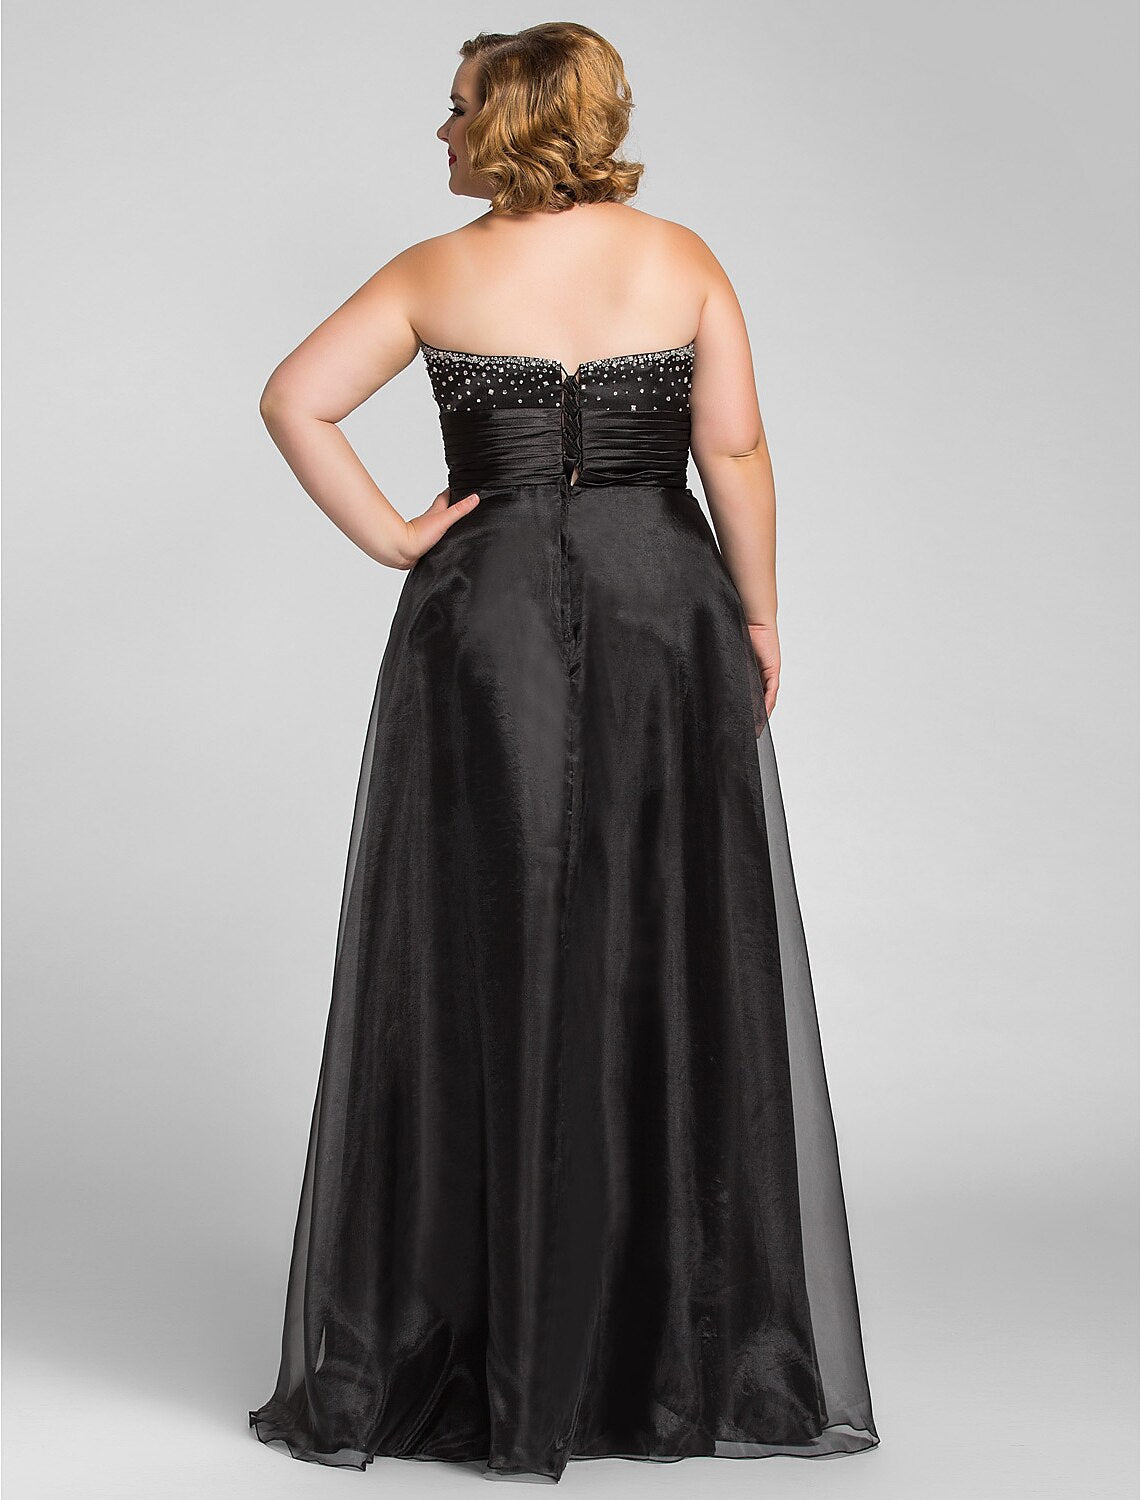 A-Line Little Black Dress Dress Prom Floor Length Sleeveless Sweetheart Organza with Ruched Beading